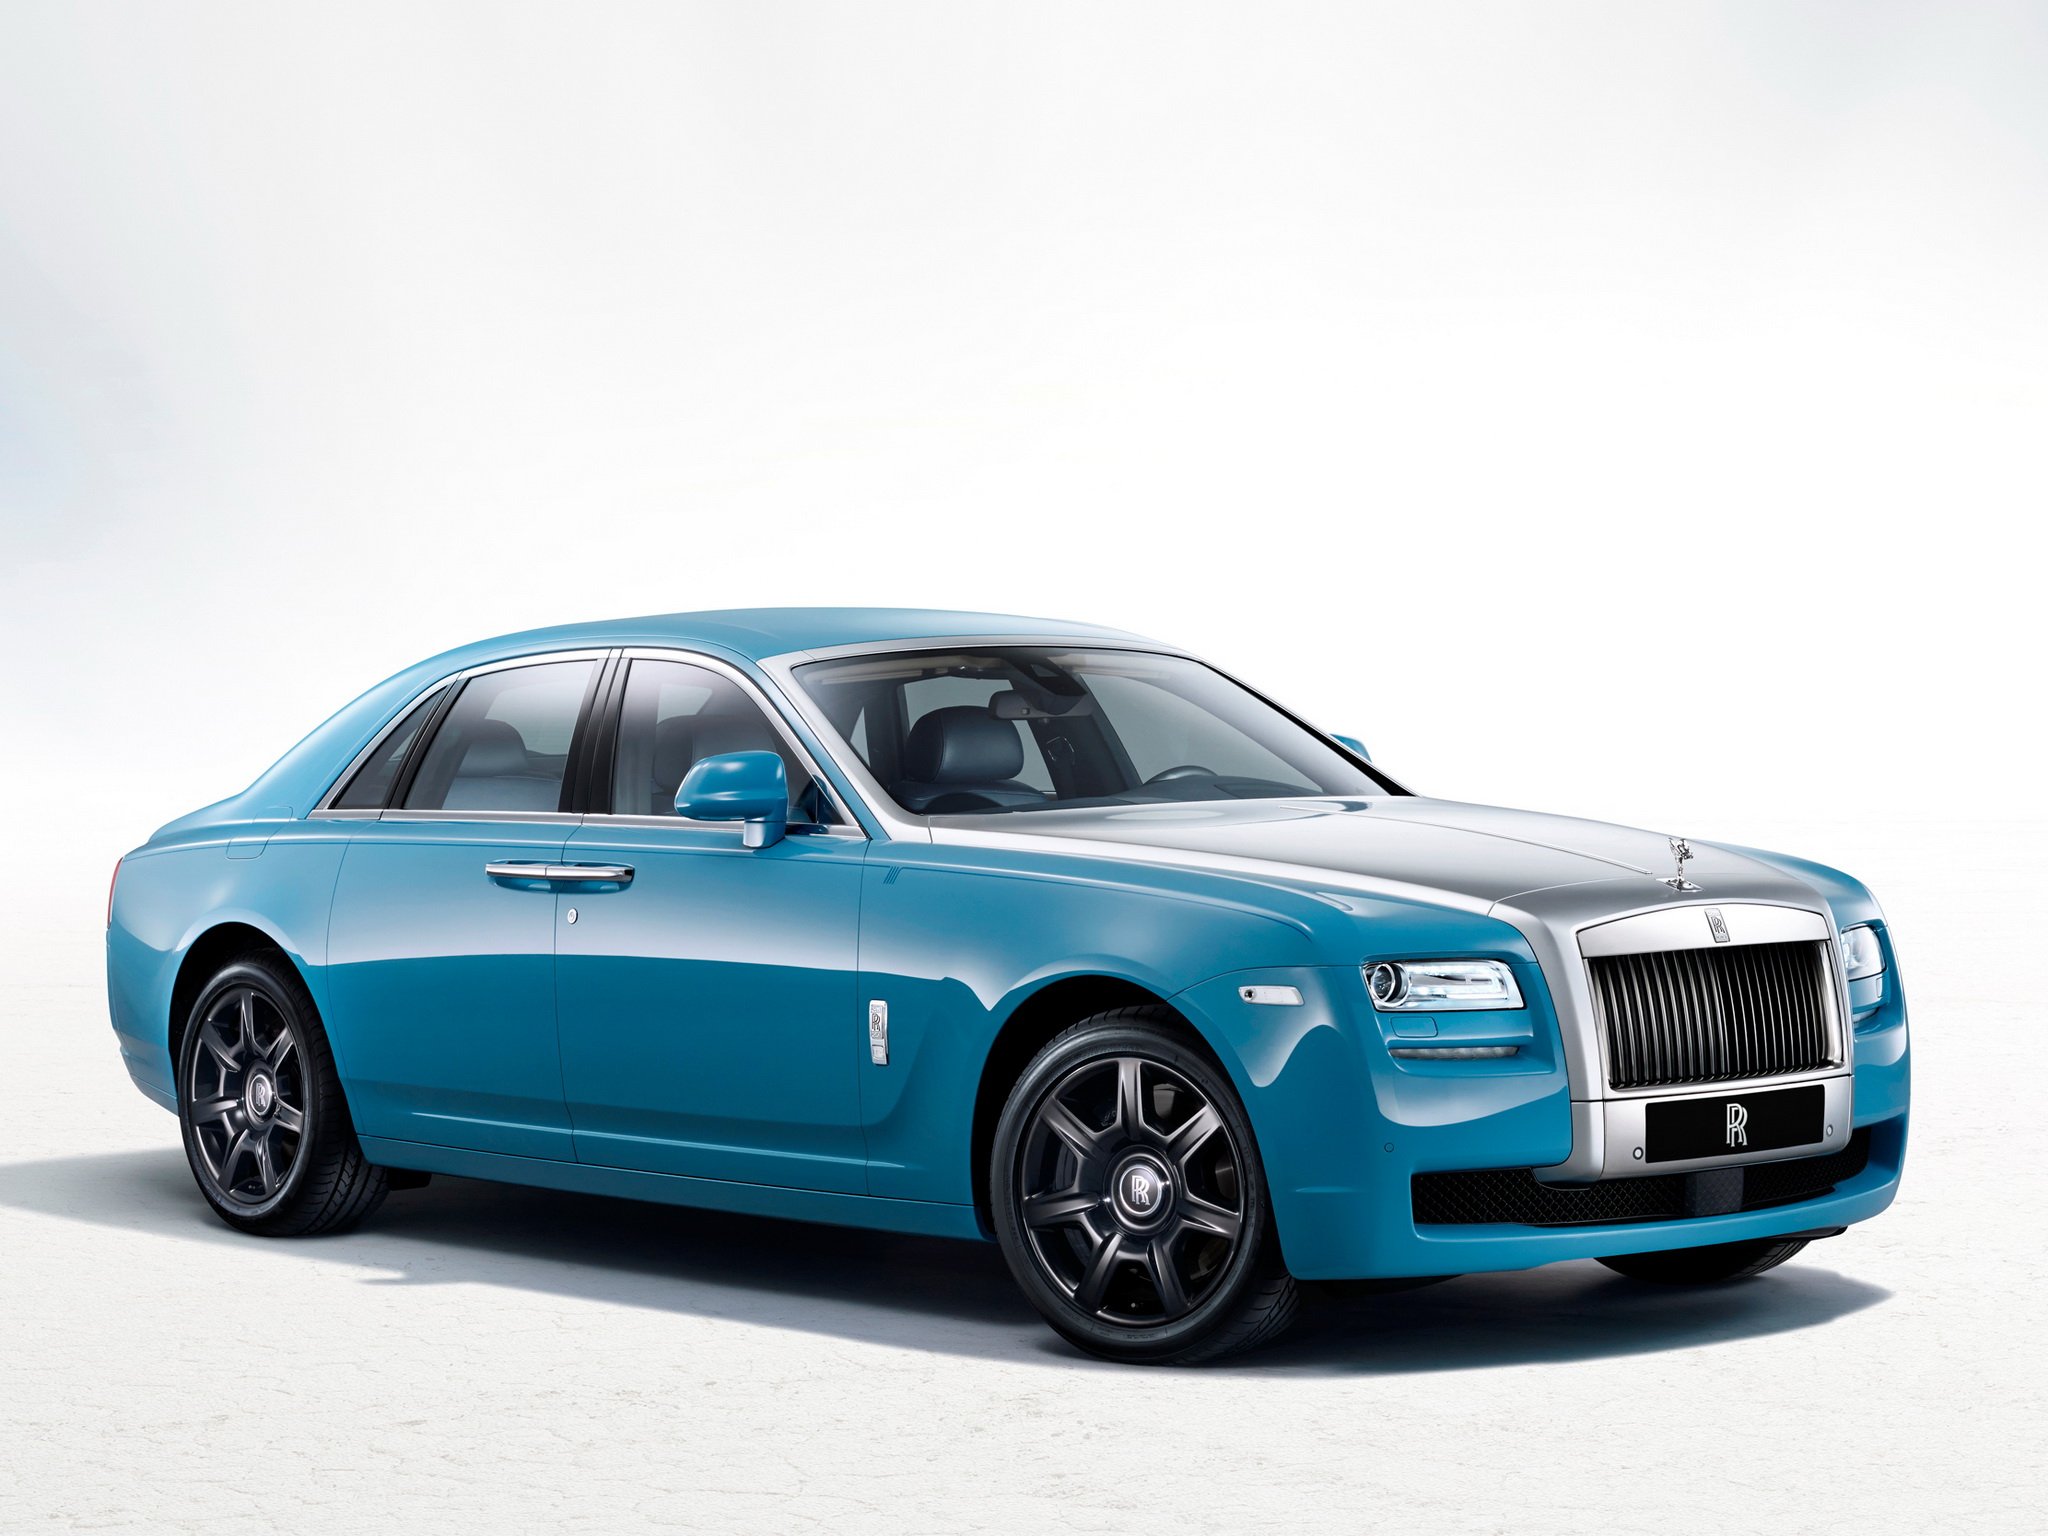 2013, Rolls, Royce, Ghost, Alpine, Trial, Centenary, Collection, Luxury, Tuning Wallpaper